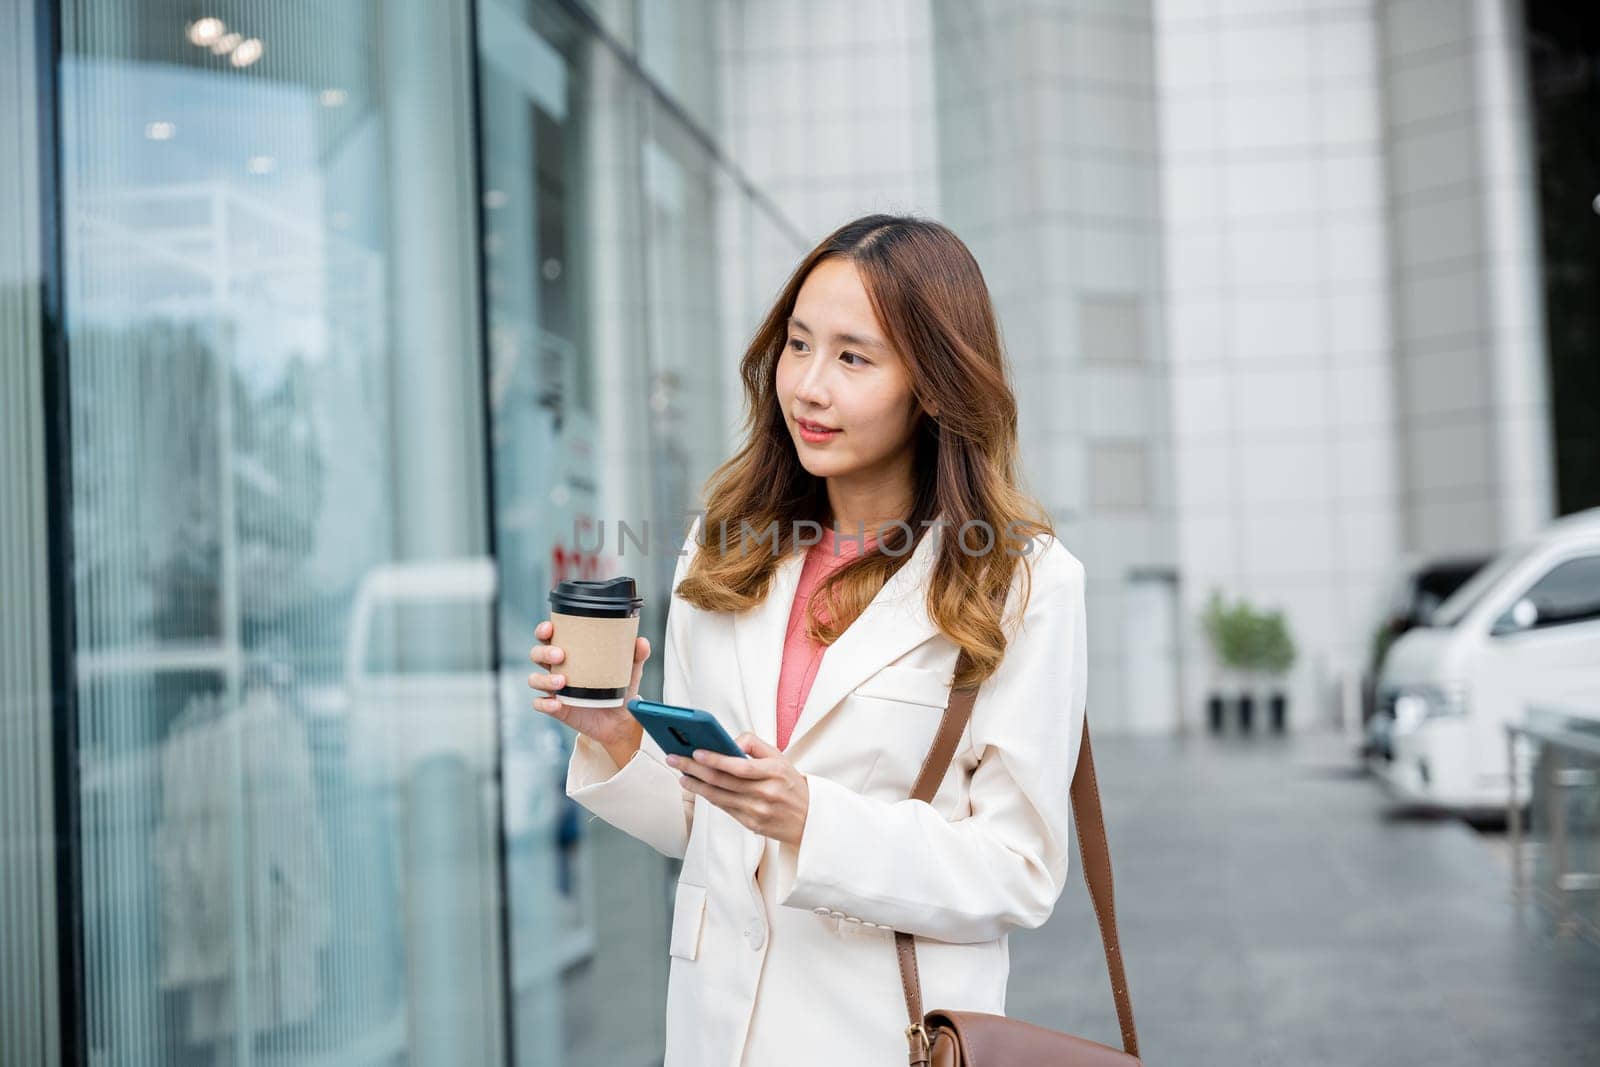 Professional woman on-the-go, managing work and coffee with ease using her smartphone and multitasking skills.